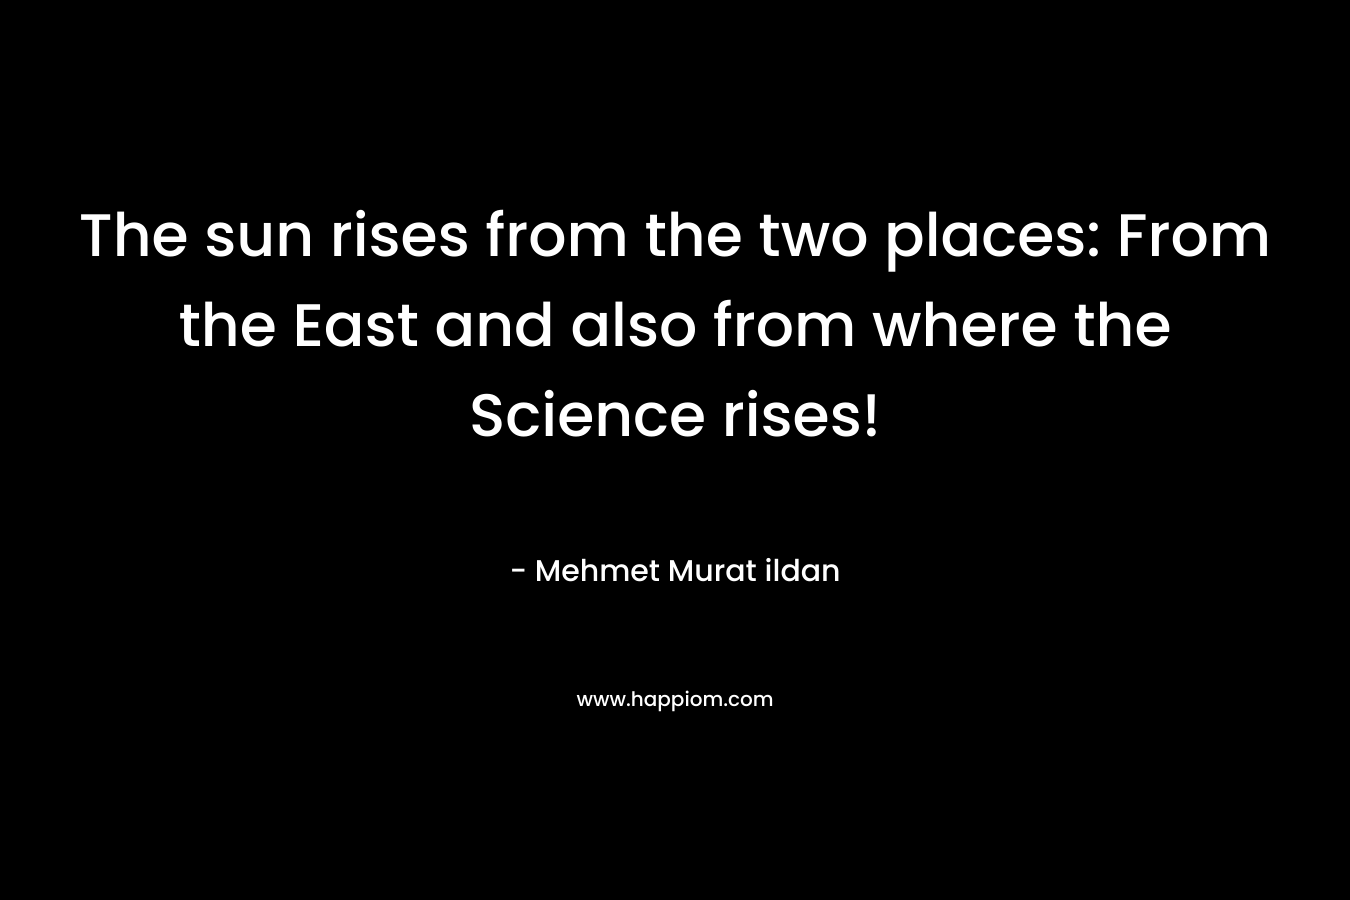 The sun rises from the two places: From the East and also from where the Science rises!